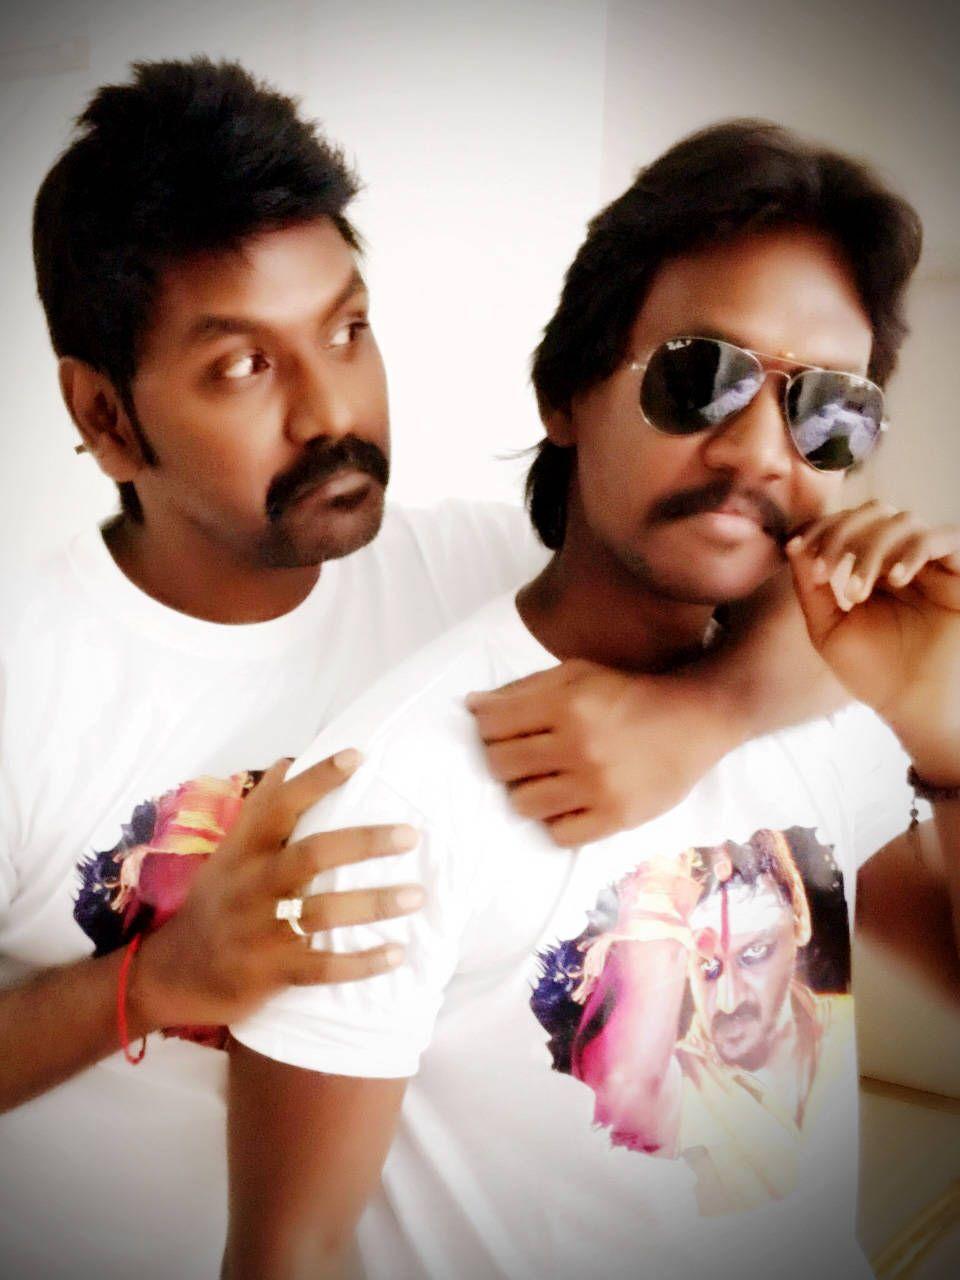 Raghava Lawrence Brother Six Pack Photos